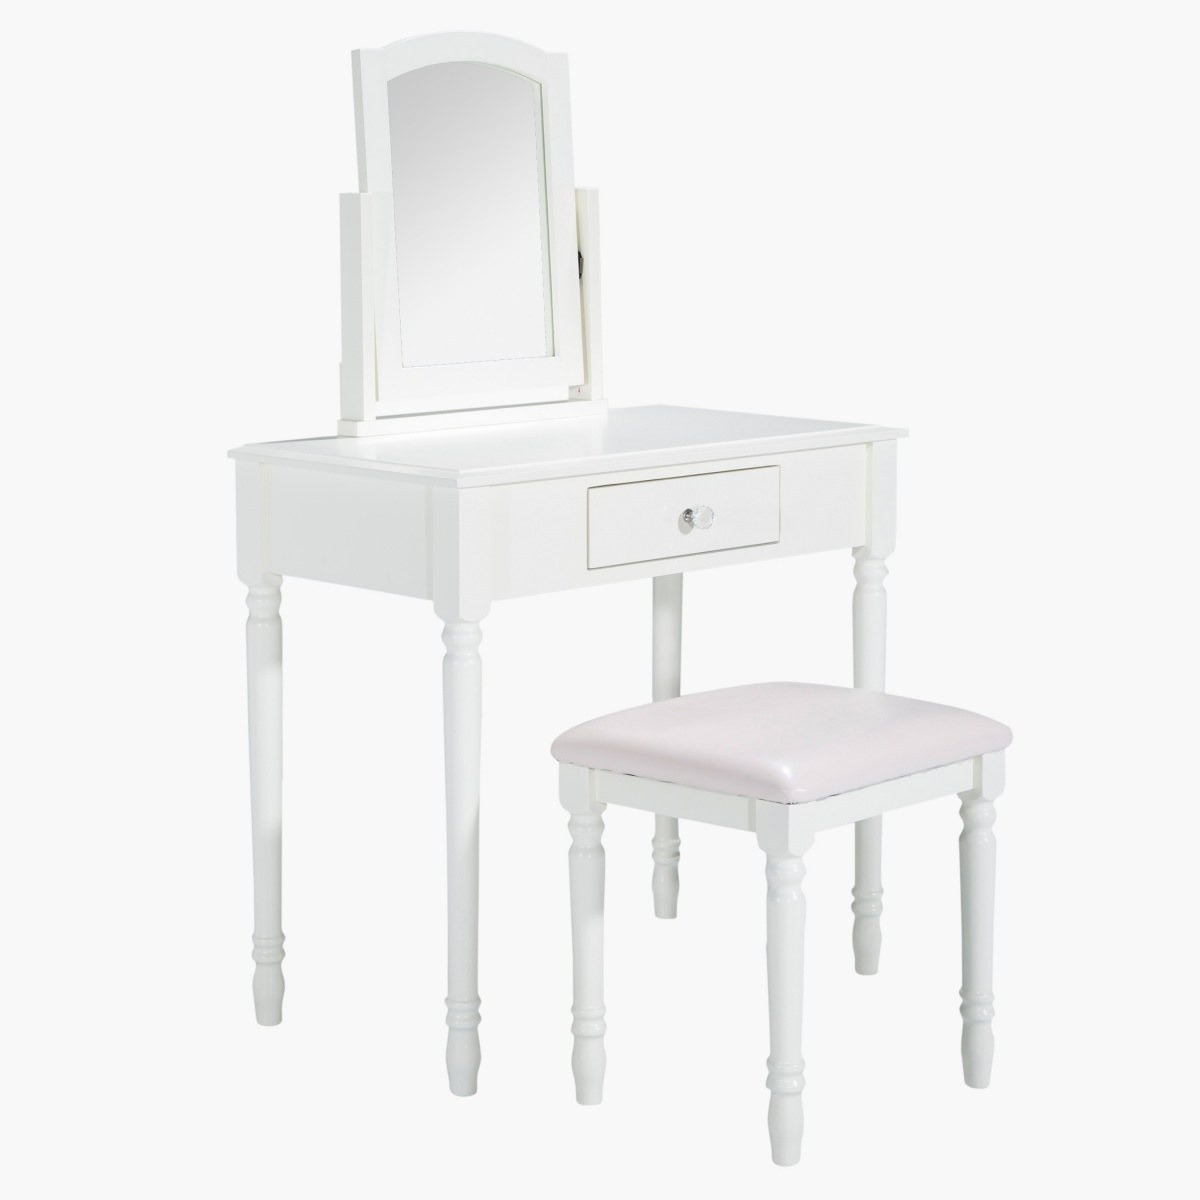 Particle board Dressing Table at Rs 3000 in Chennai | ID: 2851630137688